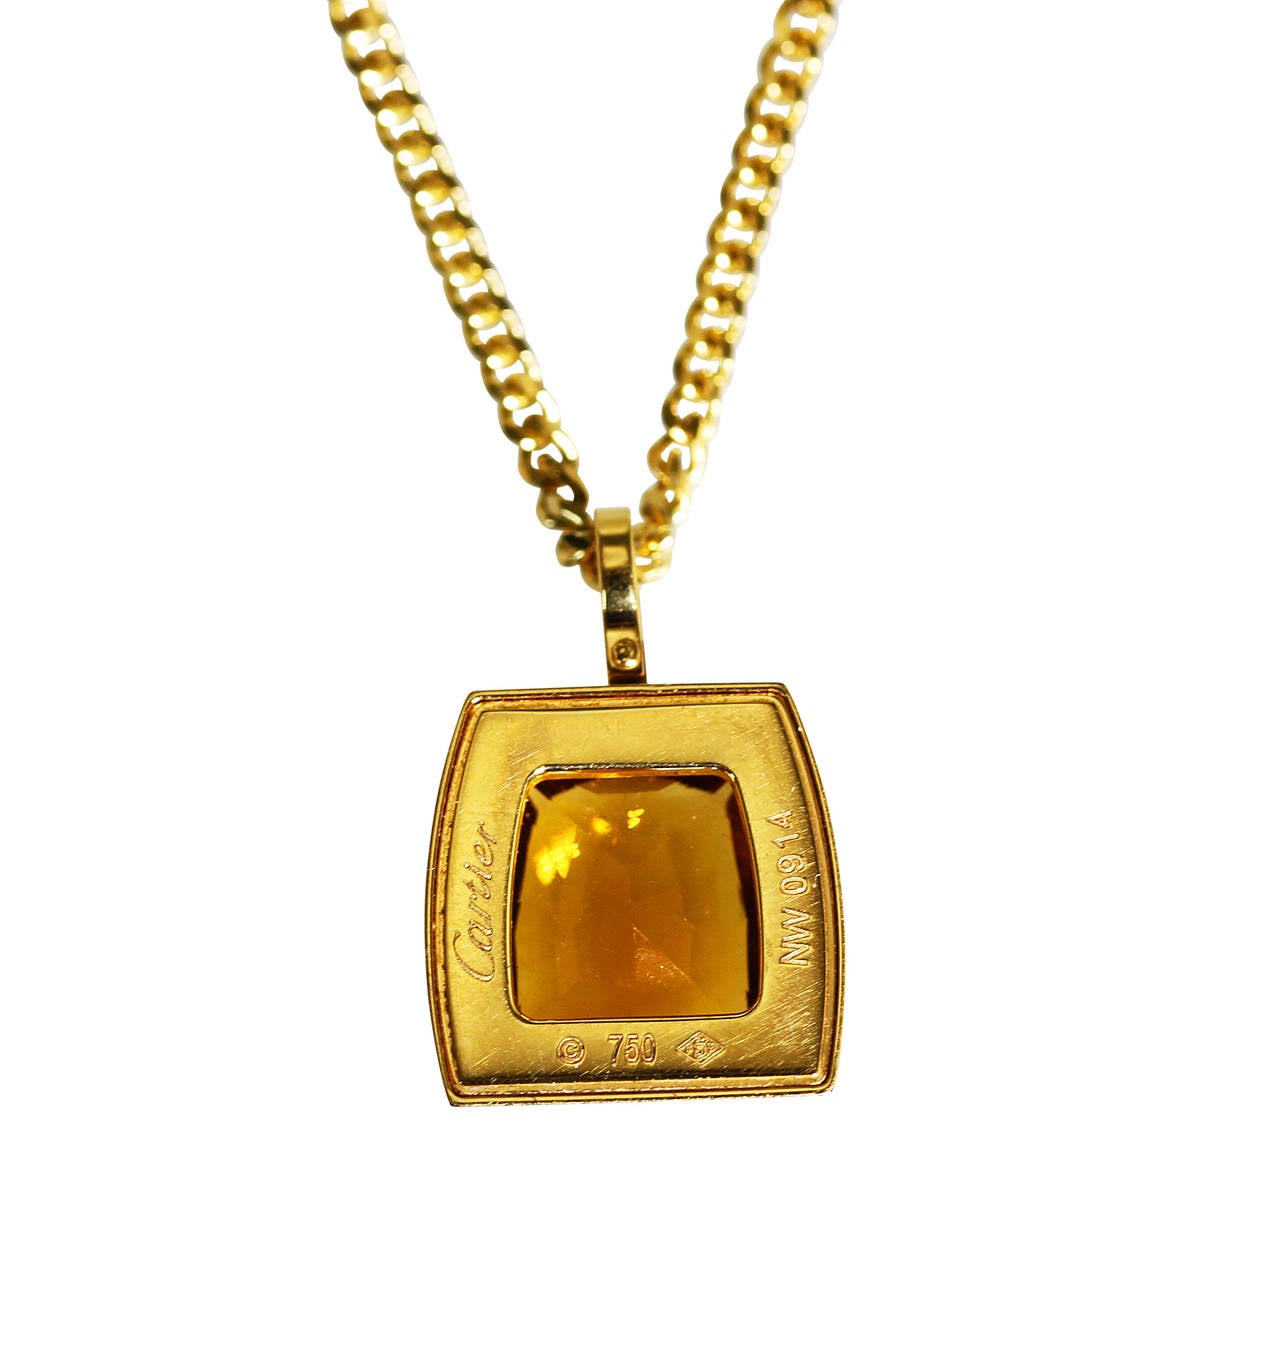 An 18 karat yellow gold, citrine and diamond pendant by Cartier, the pendant bezel set with a fancy-cut citrine weighing 5.00 carats, framed by 43 round diamonds weighing approximately 0.30 carat, gross weight 14.6 grams, signed Cartier, numbered